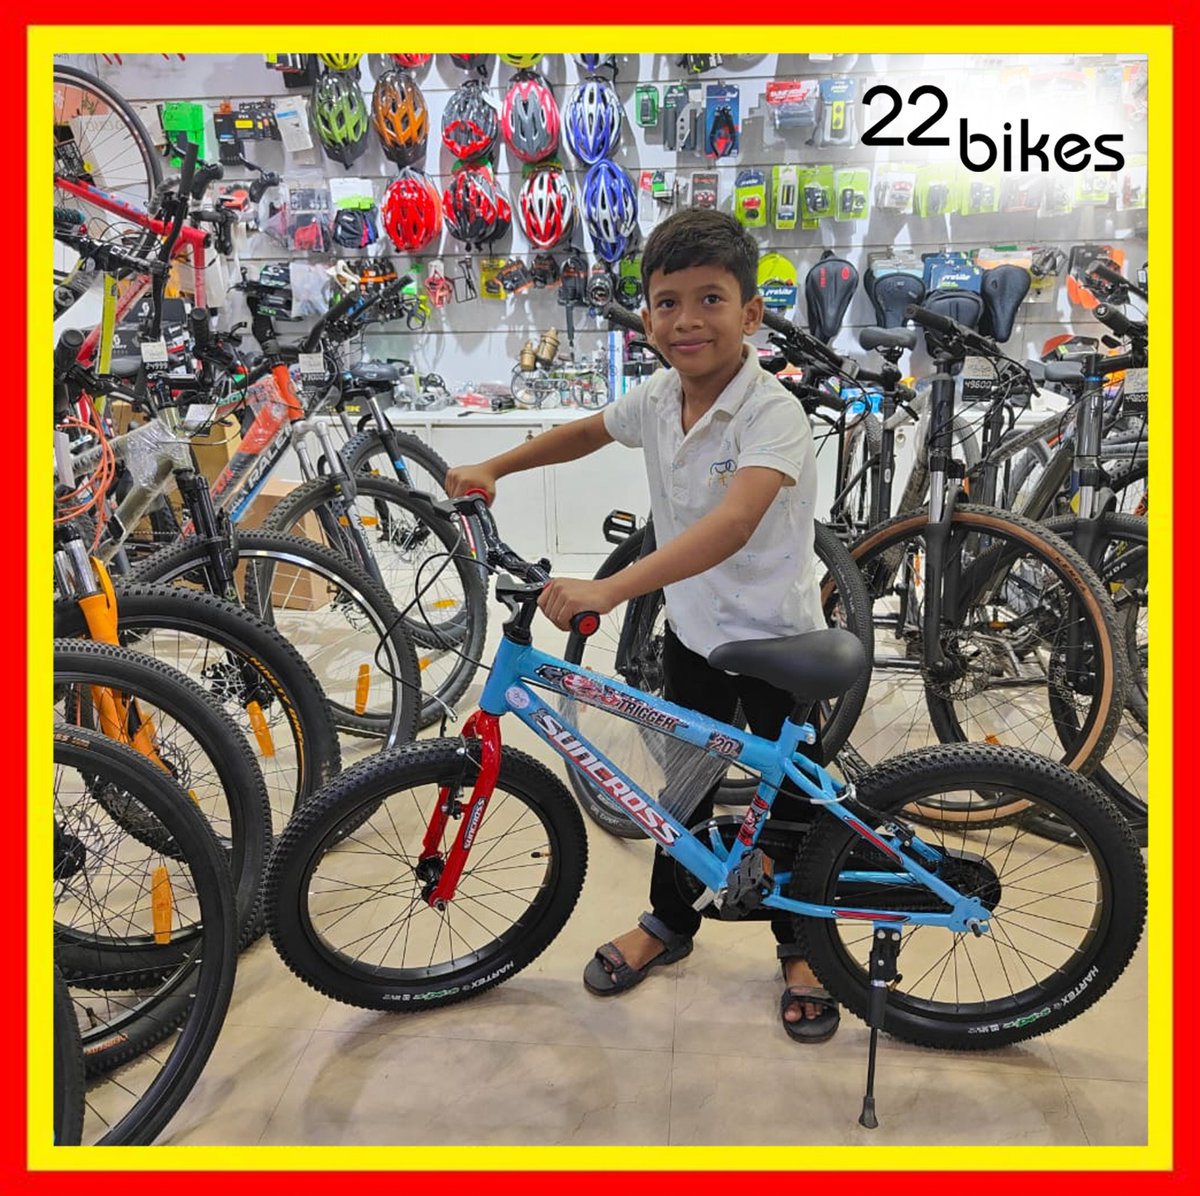 Stunning, Stylish & Safe!
22 Bikes, store is the answer to all your kids' bike dreams.

Let your kids experience the thrills and smile with our Suncross Trigger model kids Bike.

#22bikes #ride #biker #instacycle #streetbike #bikergang #bicycleriders #bikestagram #rideout